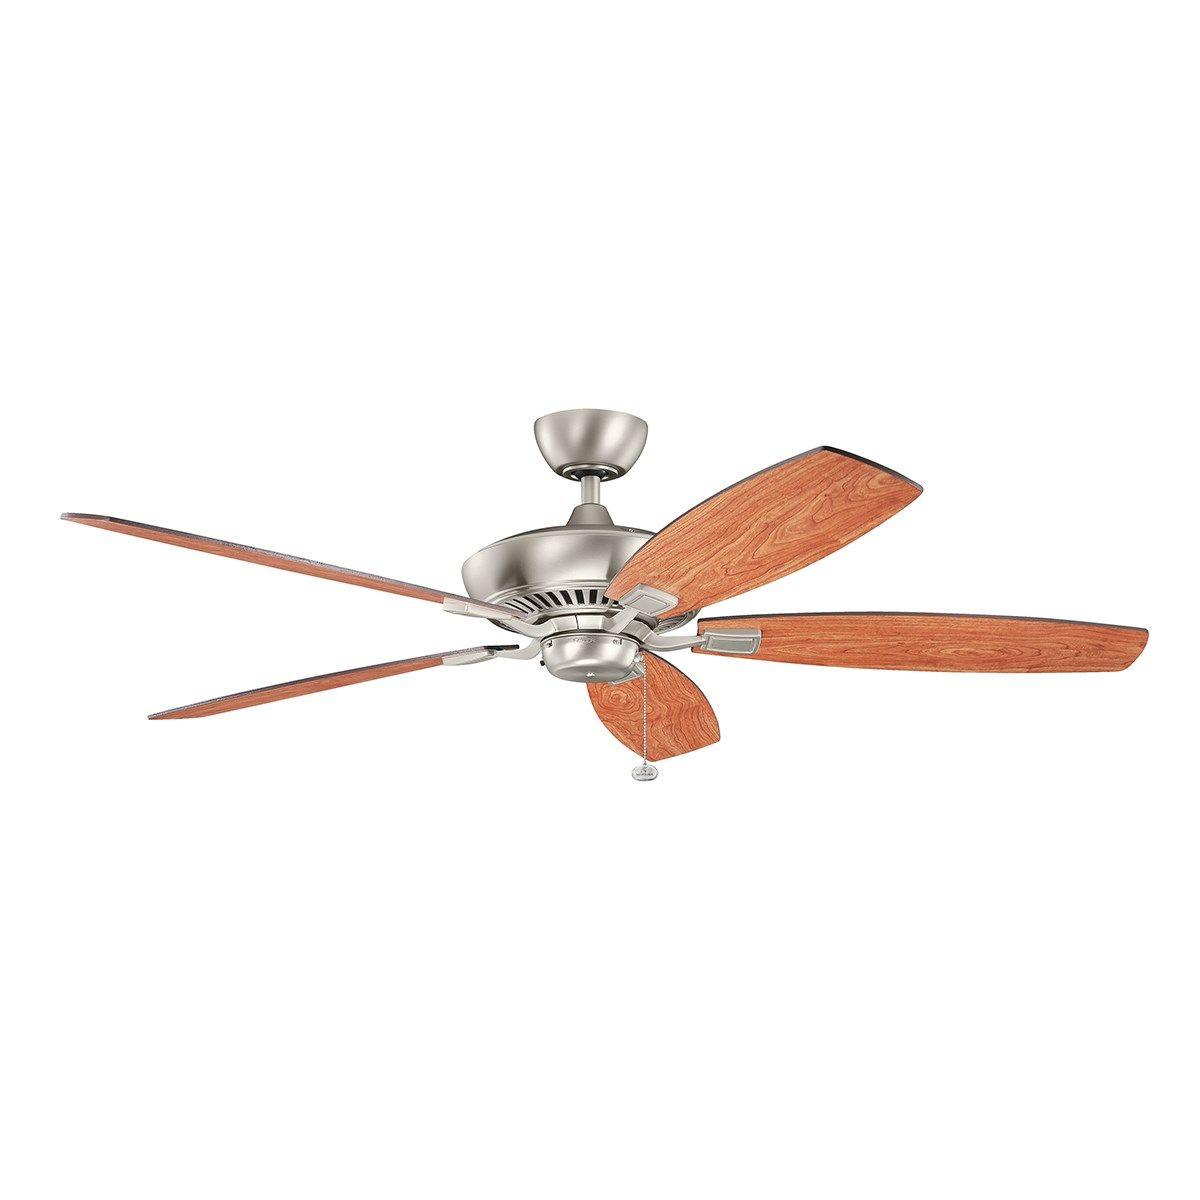 Canfield 60 Inch Ceiling Fan With Pull Chain